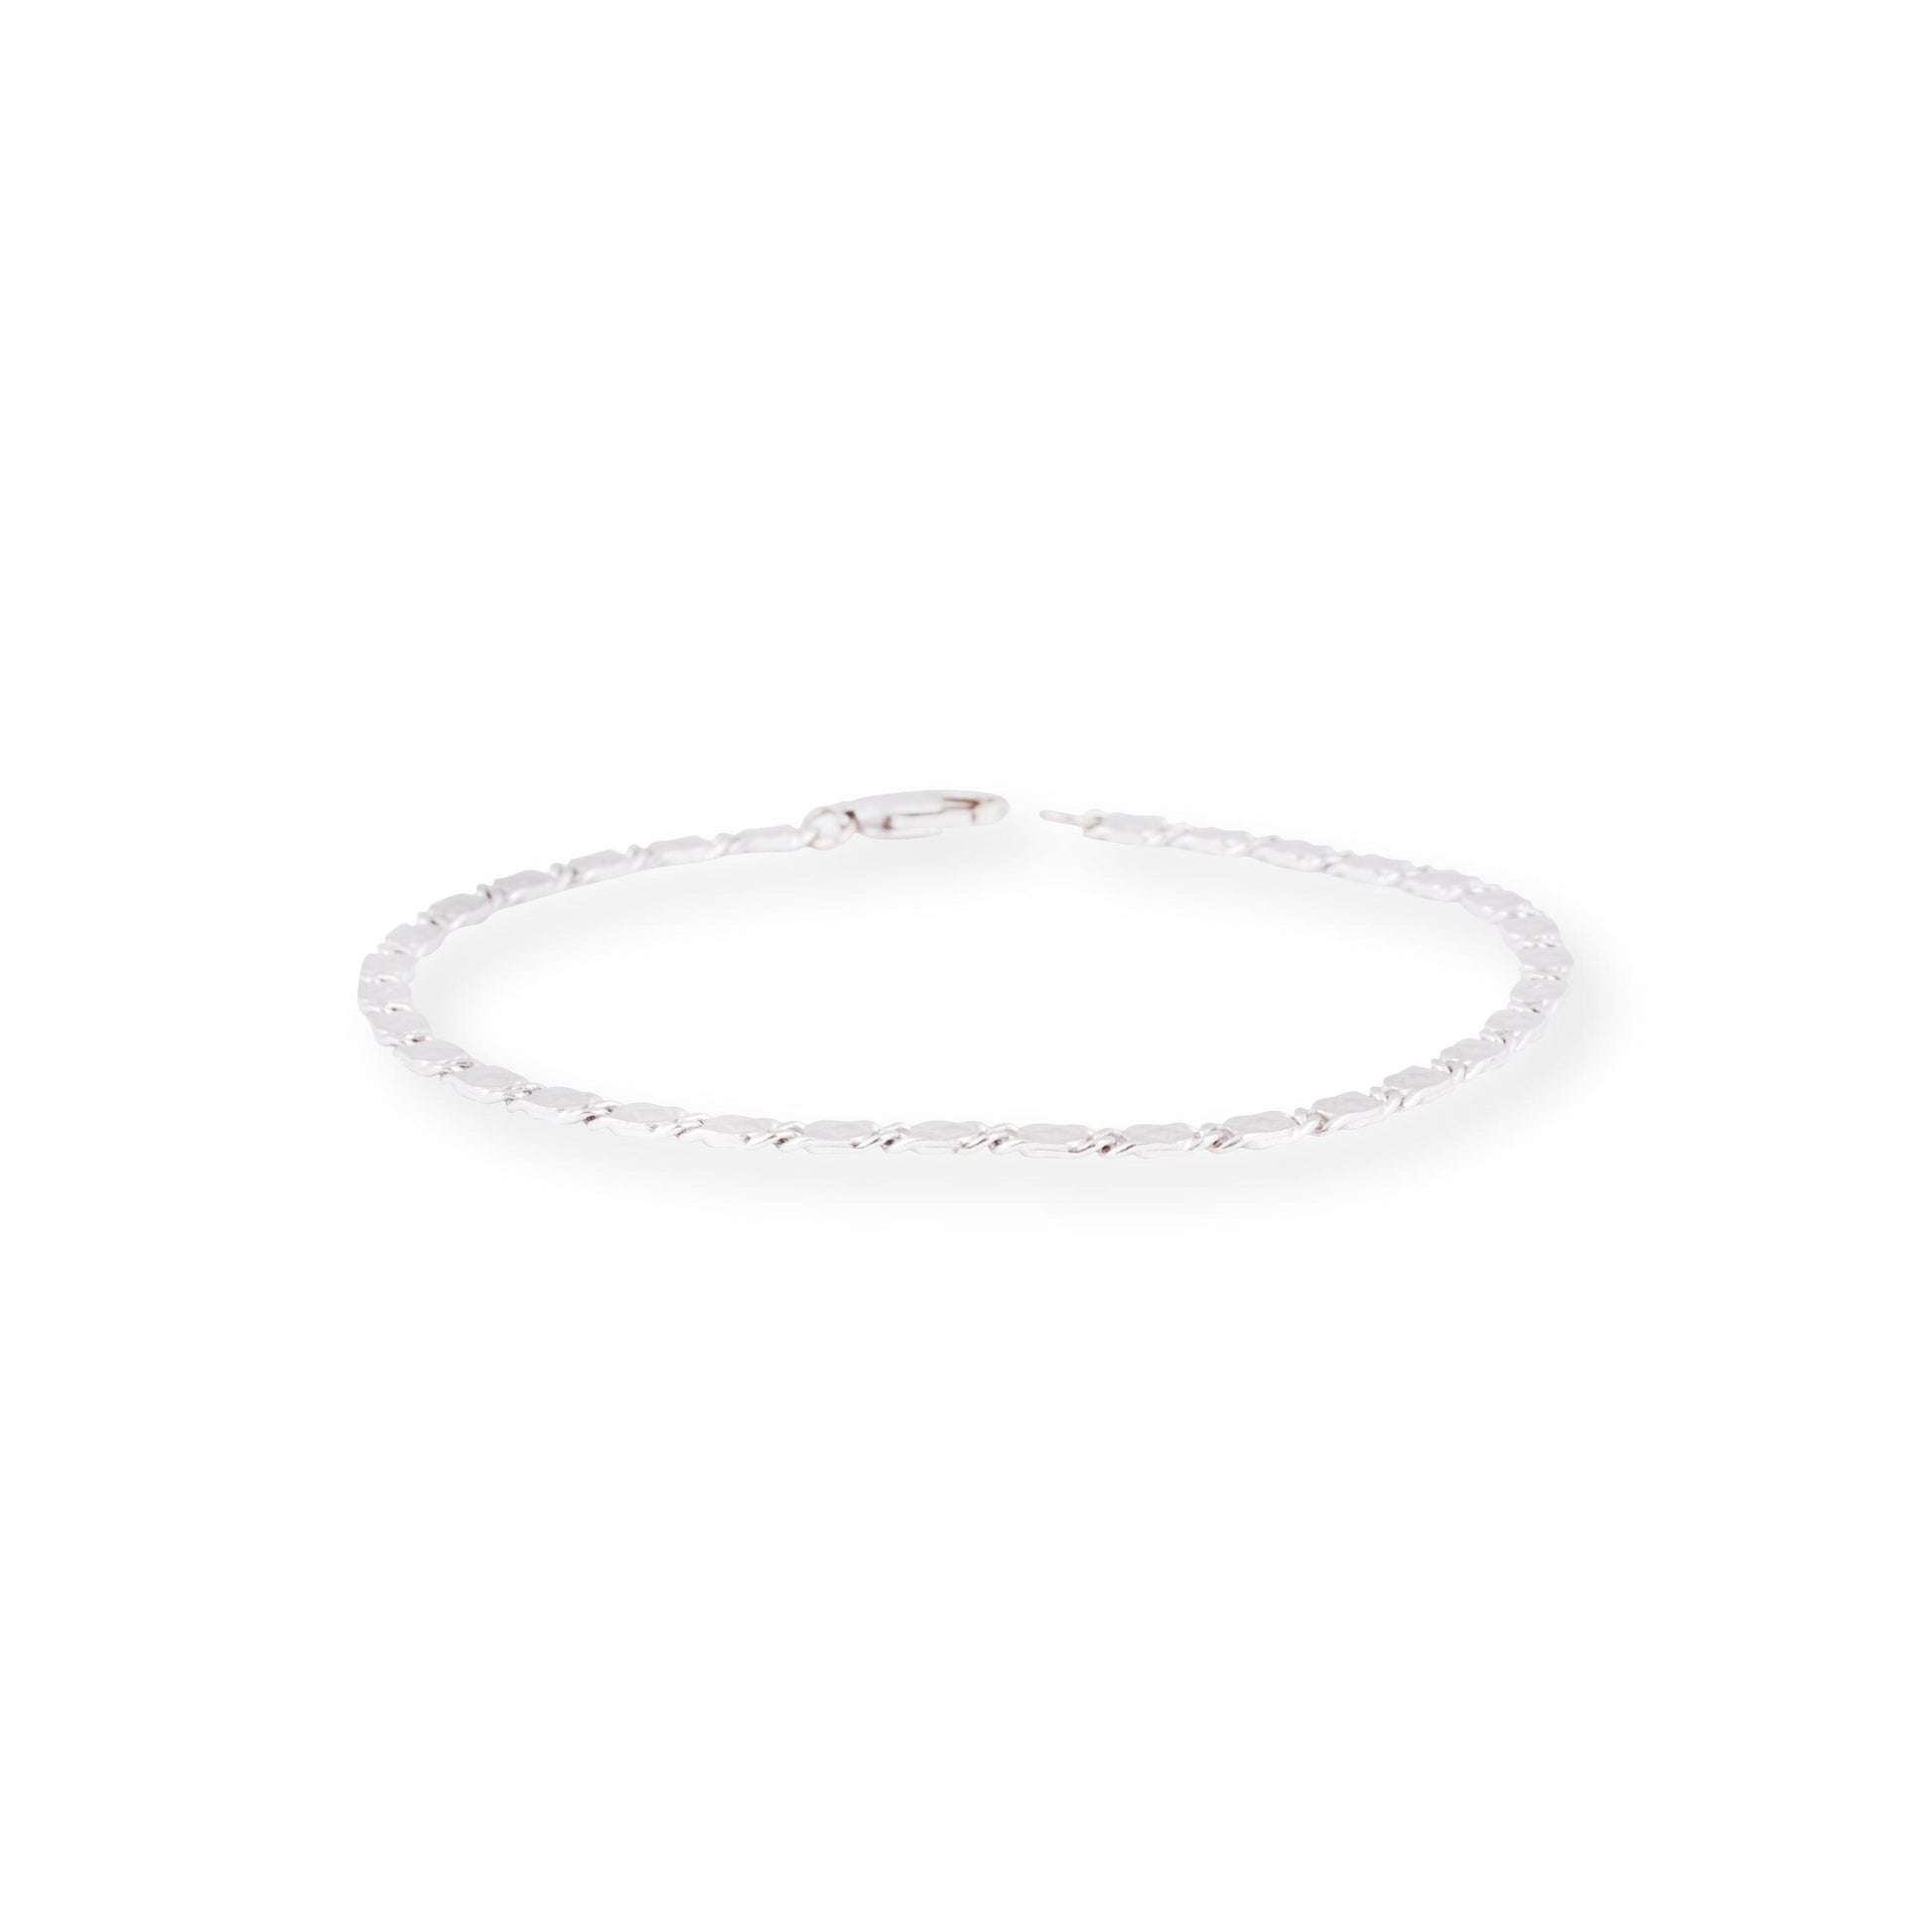 18ct White Gold Bracelet with Diamond Cut Design & Lobster Clasp LBR-8521 - Minar Jewellers